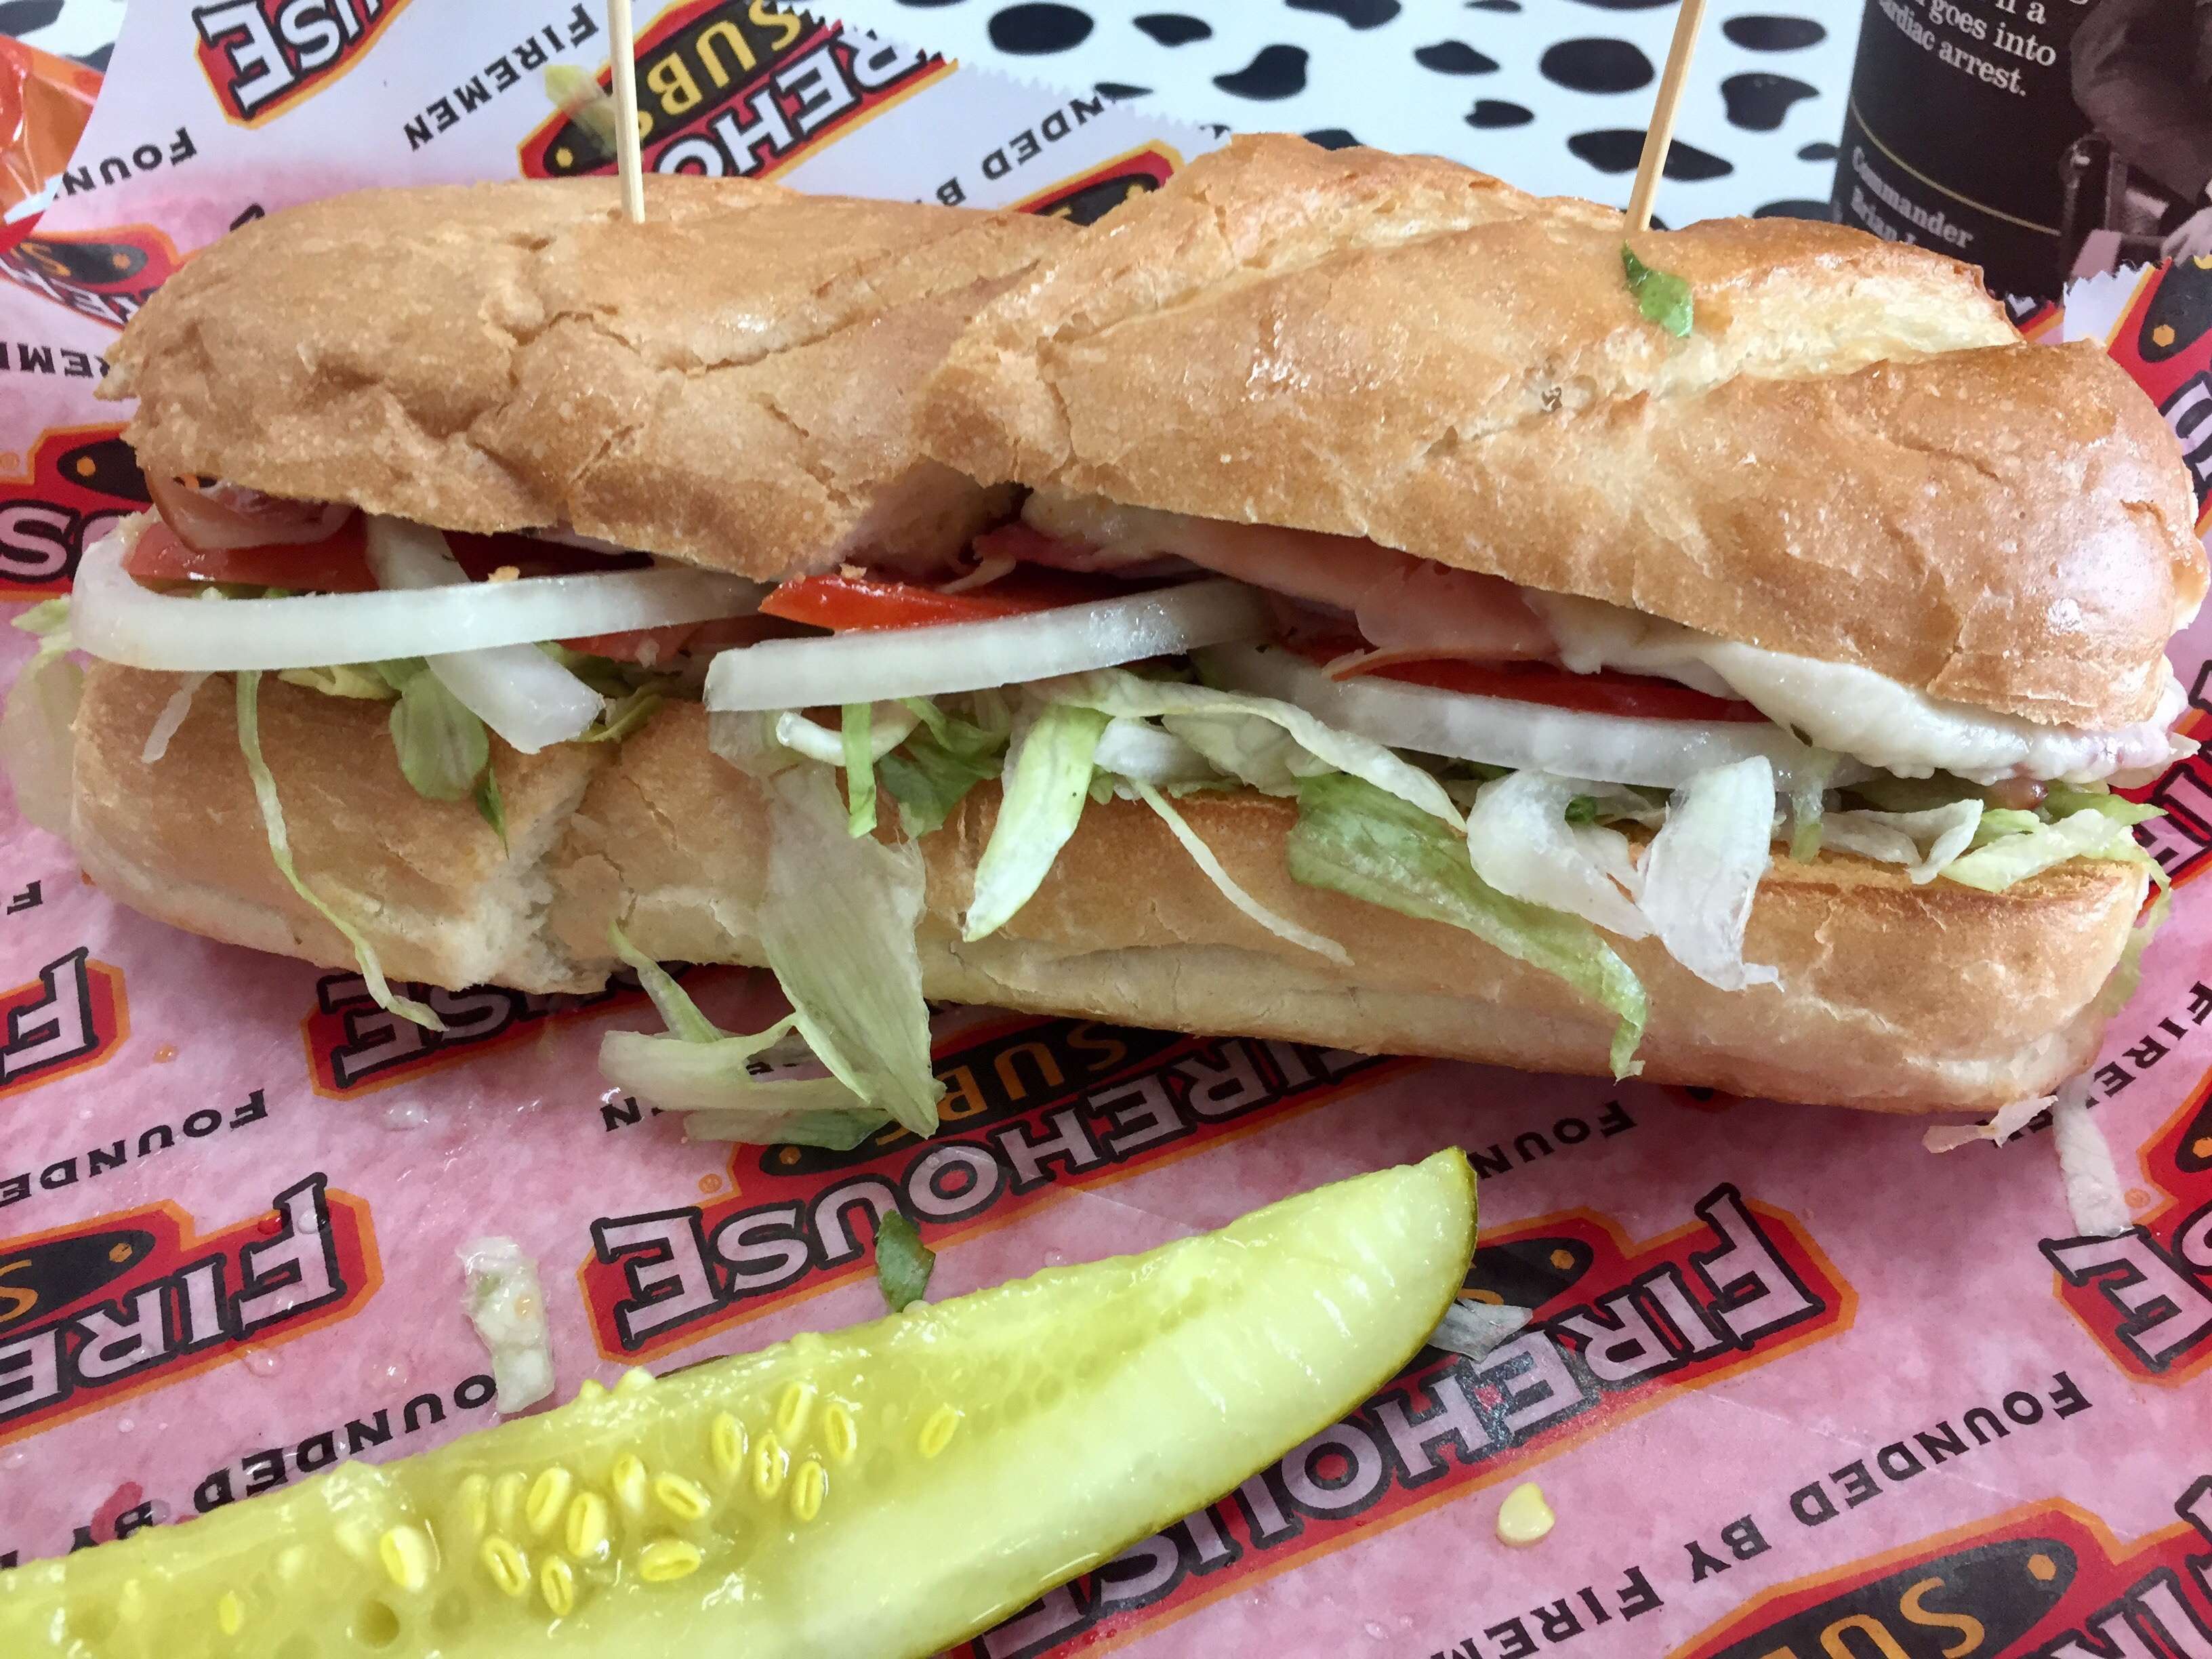 mike's firehouse subs